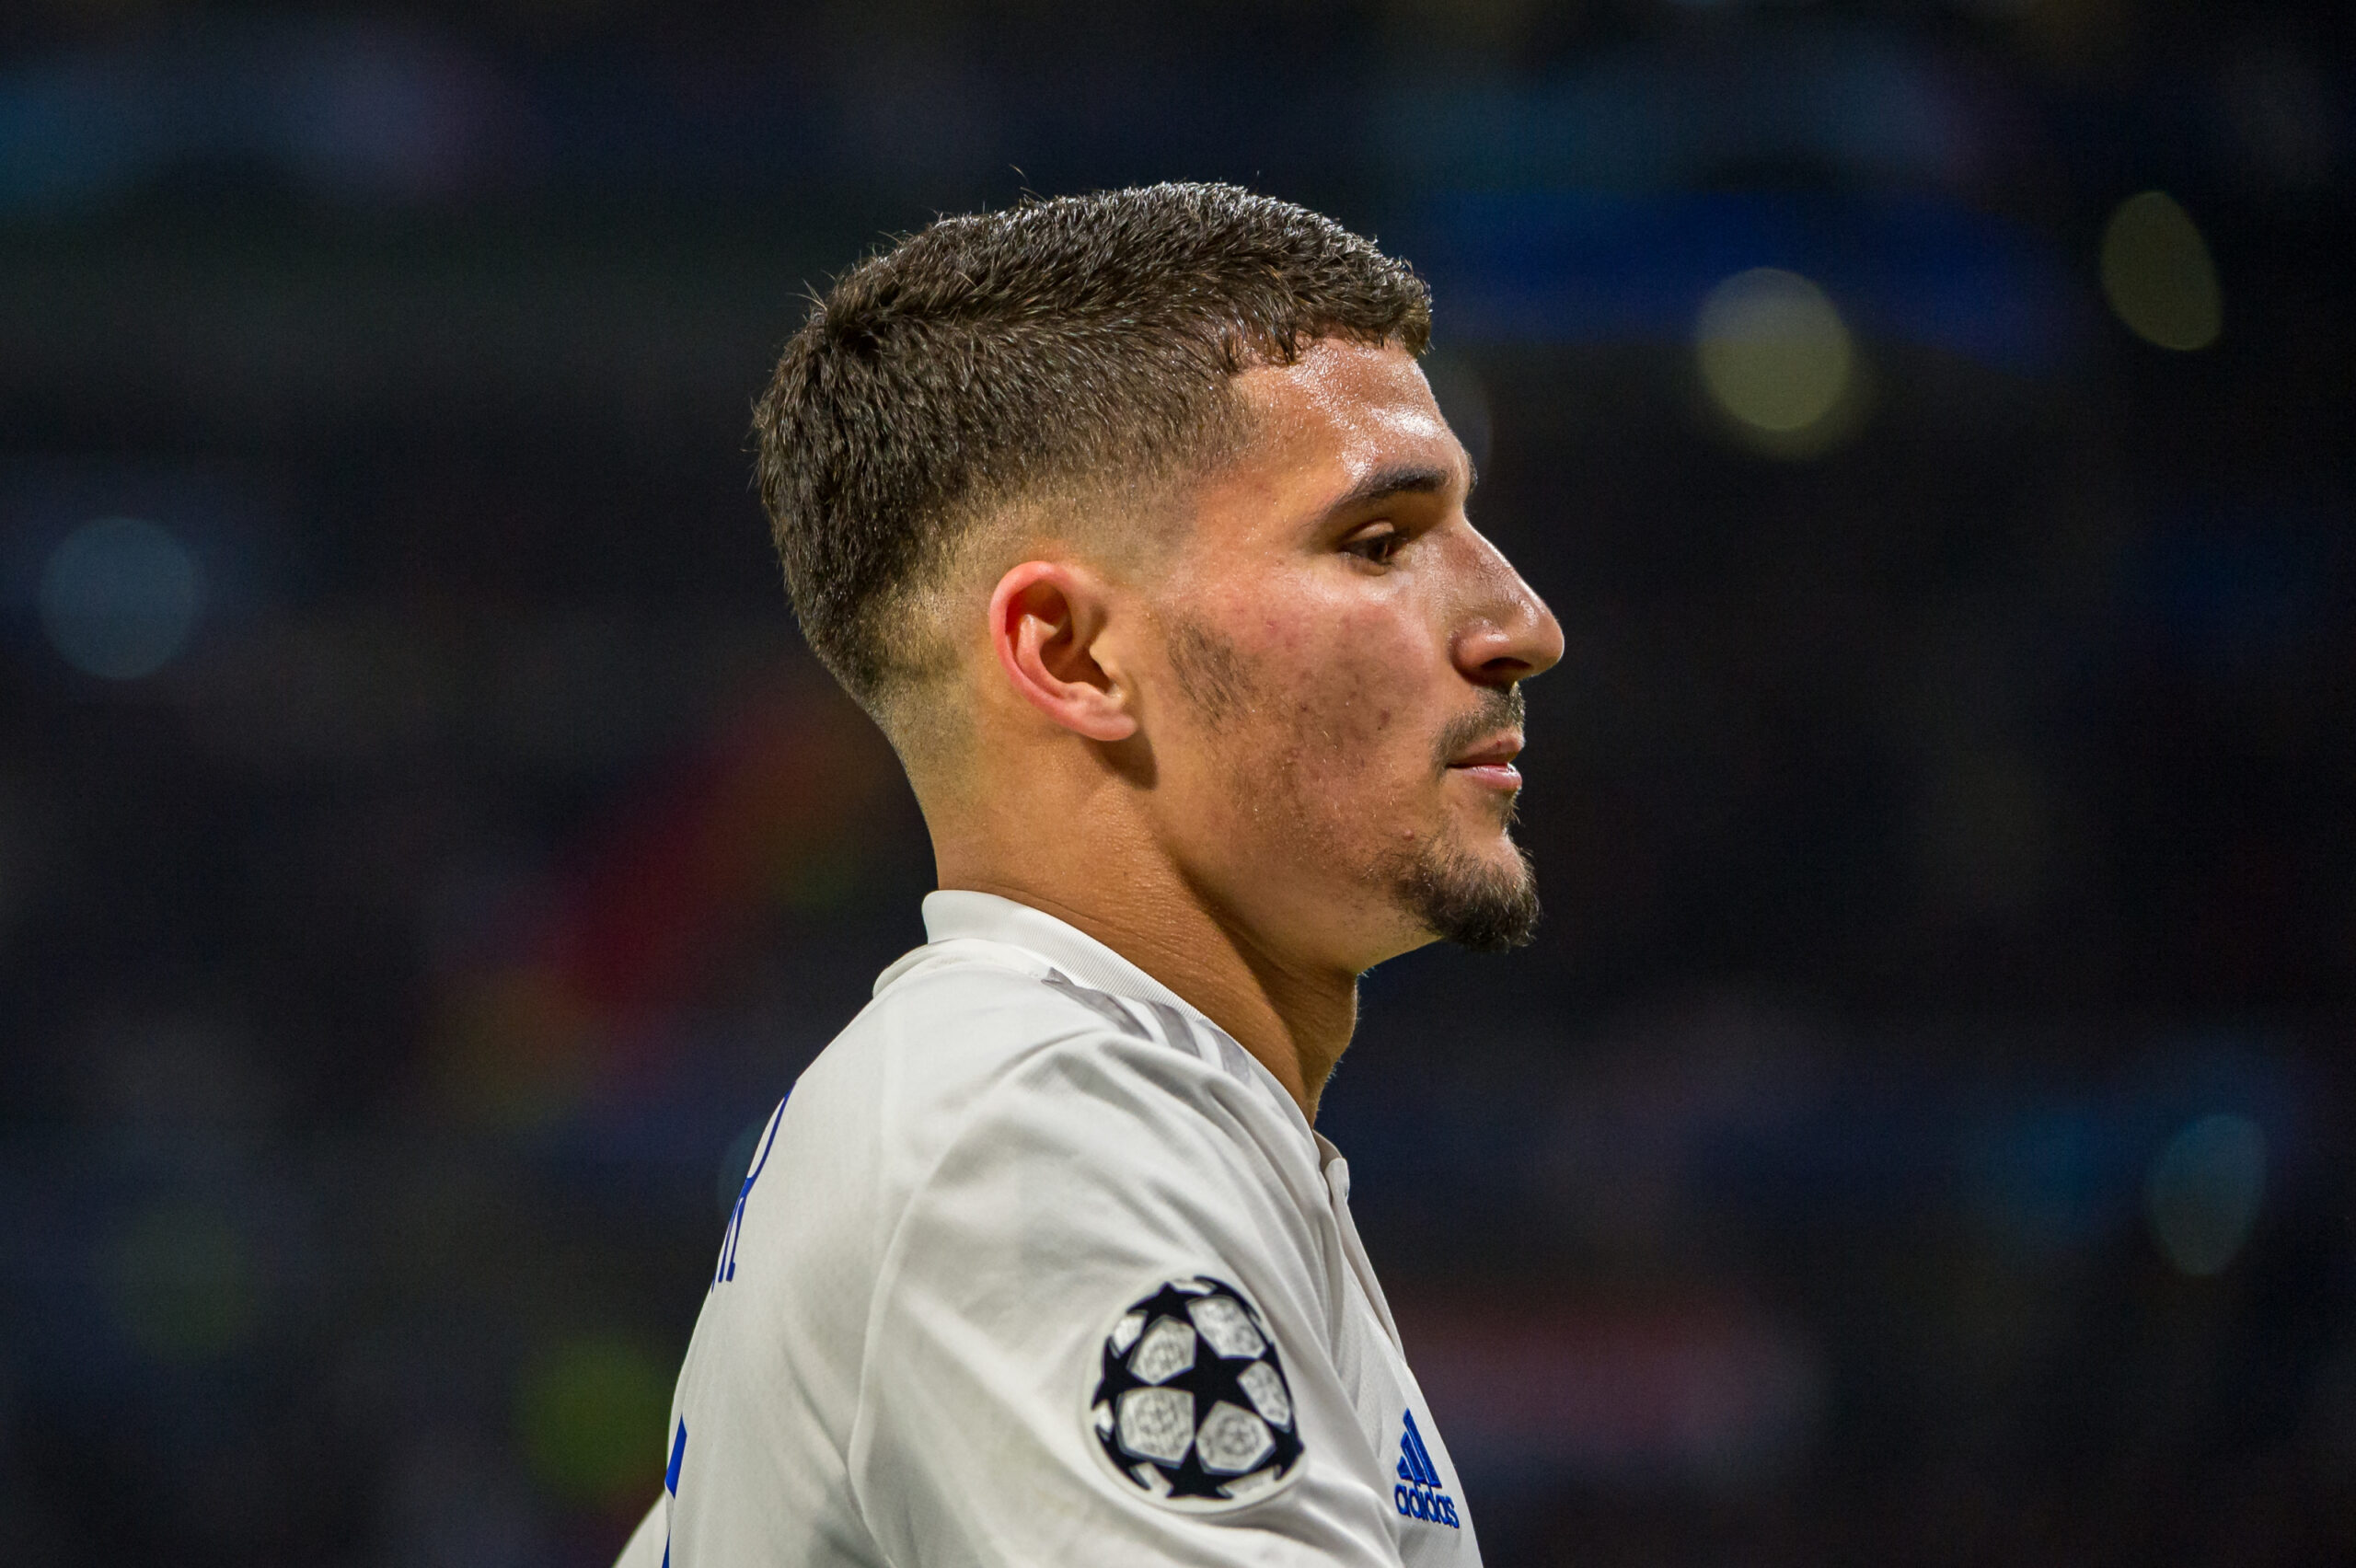 Olympique Lyonnais talent Houssem Aouar has been tracked by top clubs this season, with his free agency bound to materialize at the end of the season.